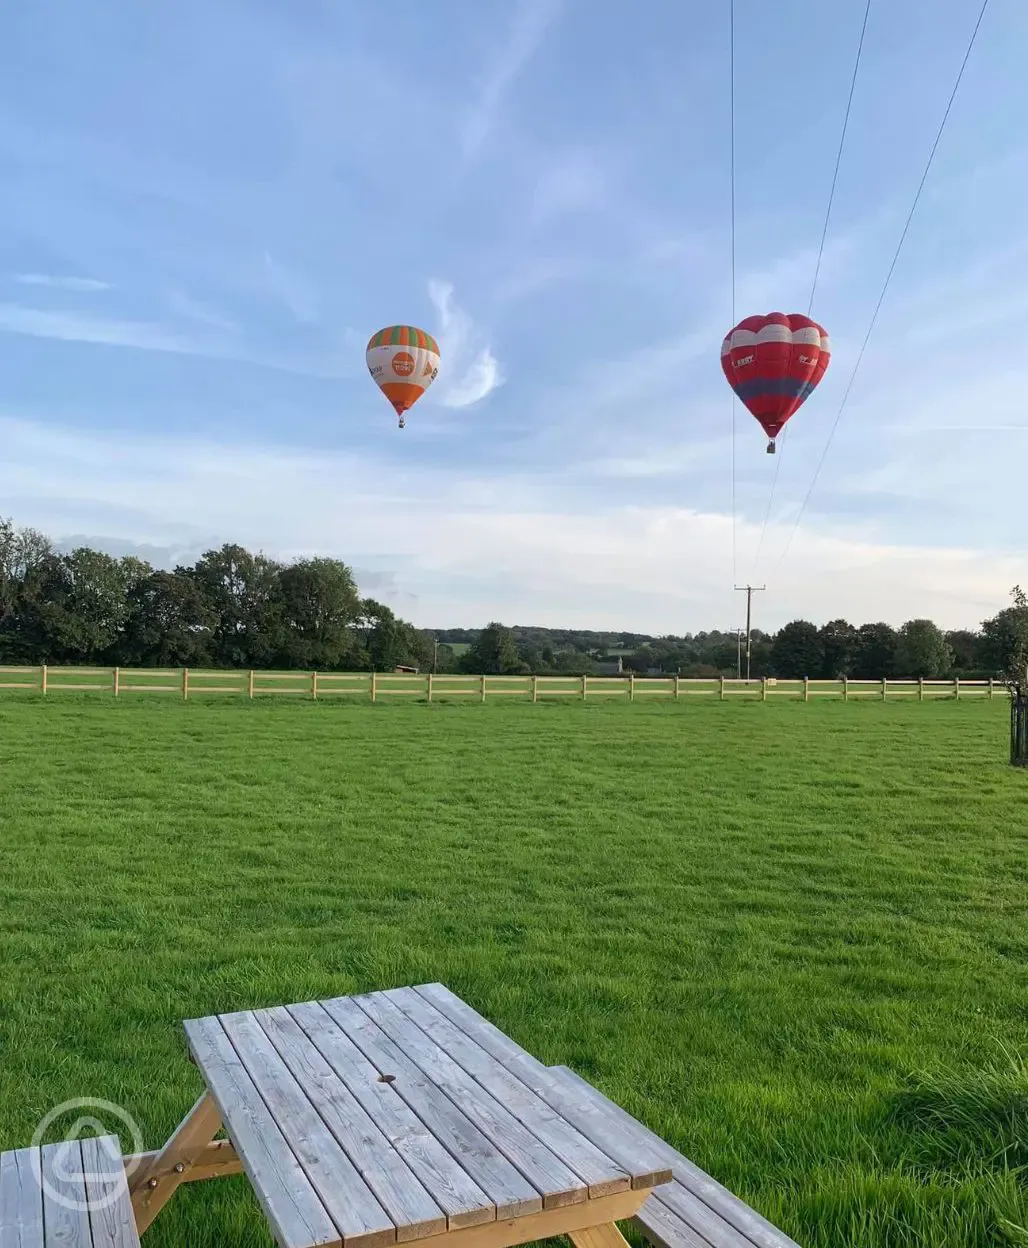 Hot air balloons over site